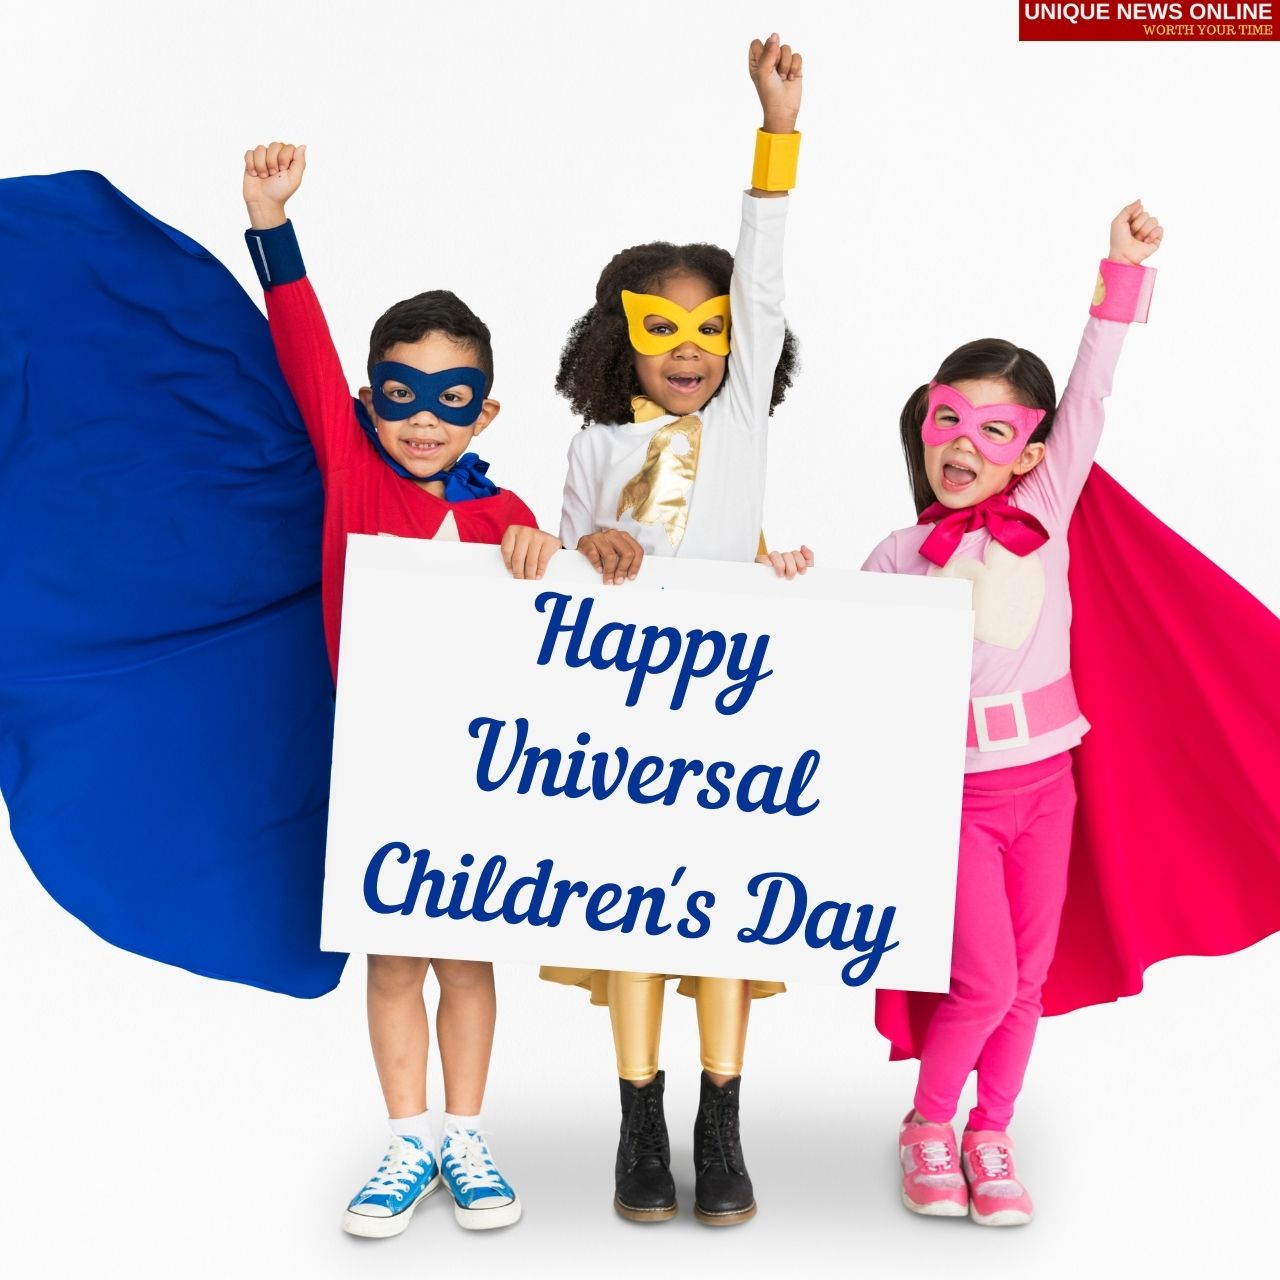 Universal Children's Day 2021 Quotes, Wishes, HD Images, Greetings, and Drawing to Share